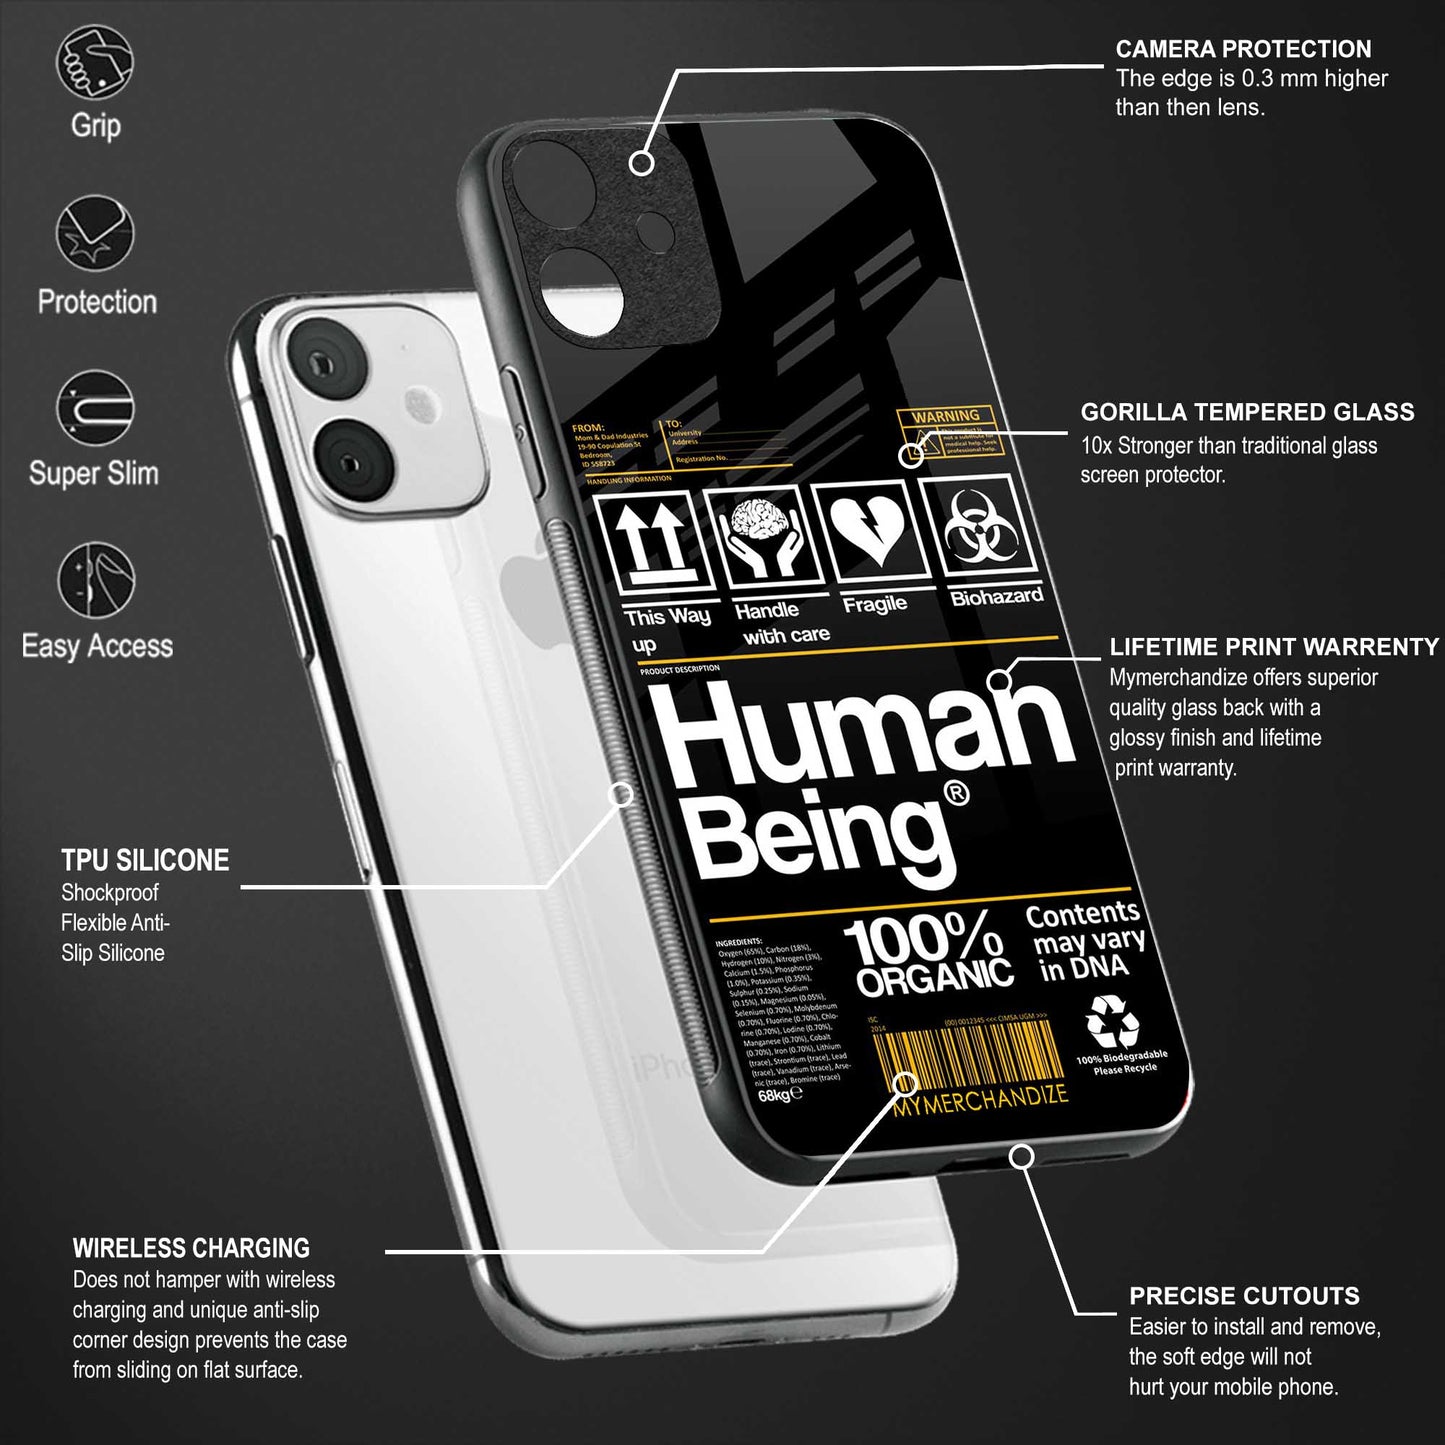 human being label phone cover for samsung galaxy note 20